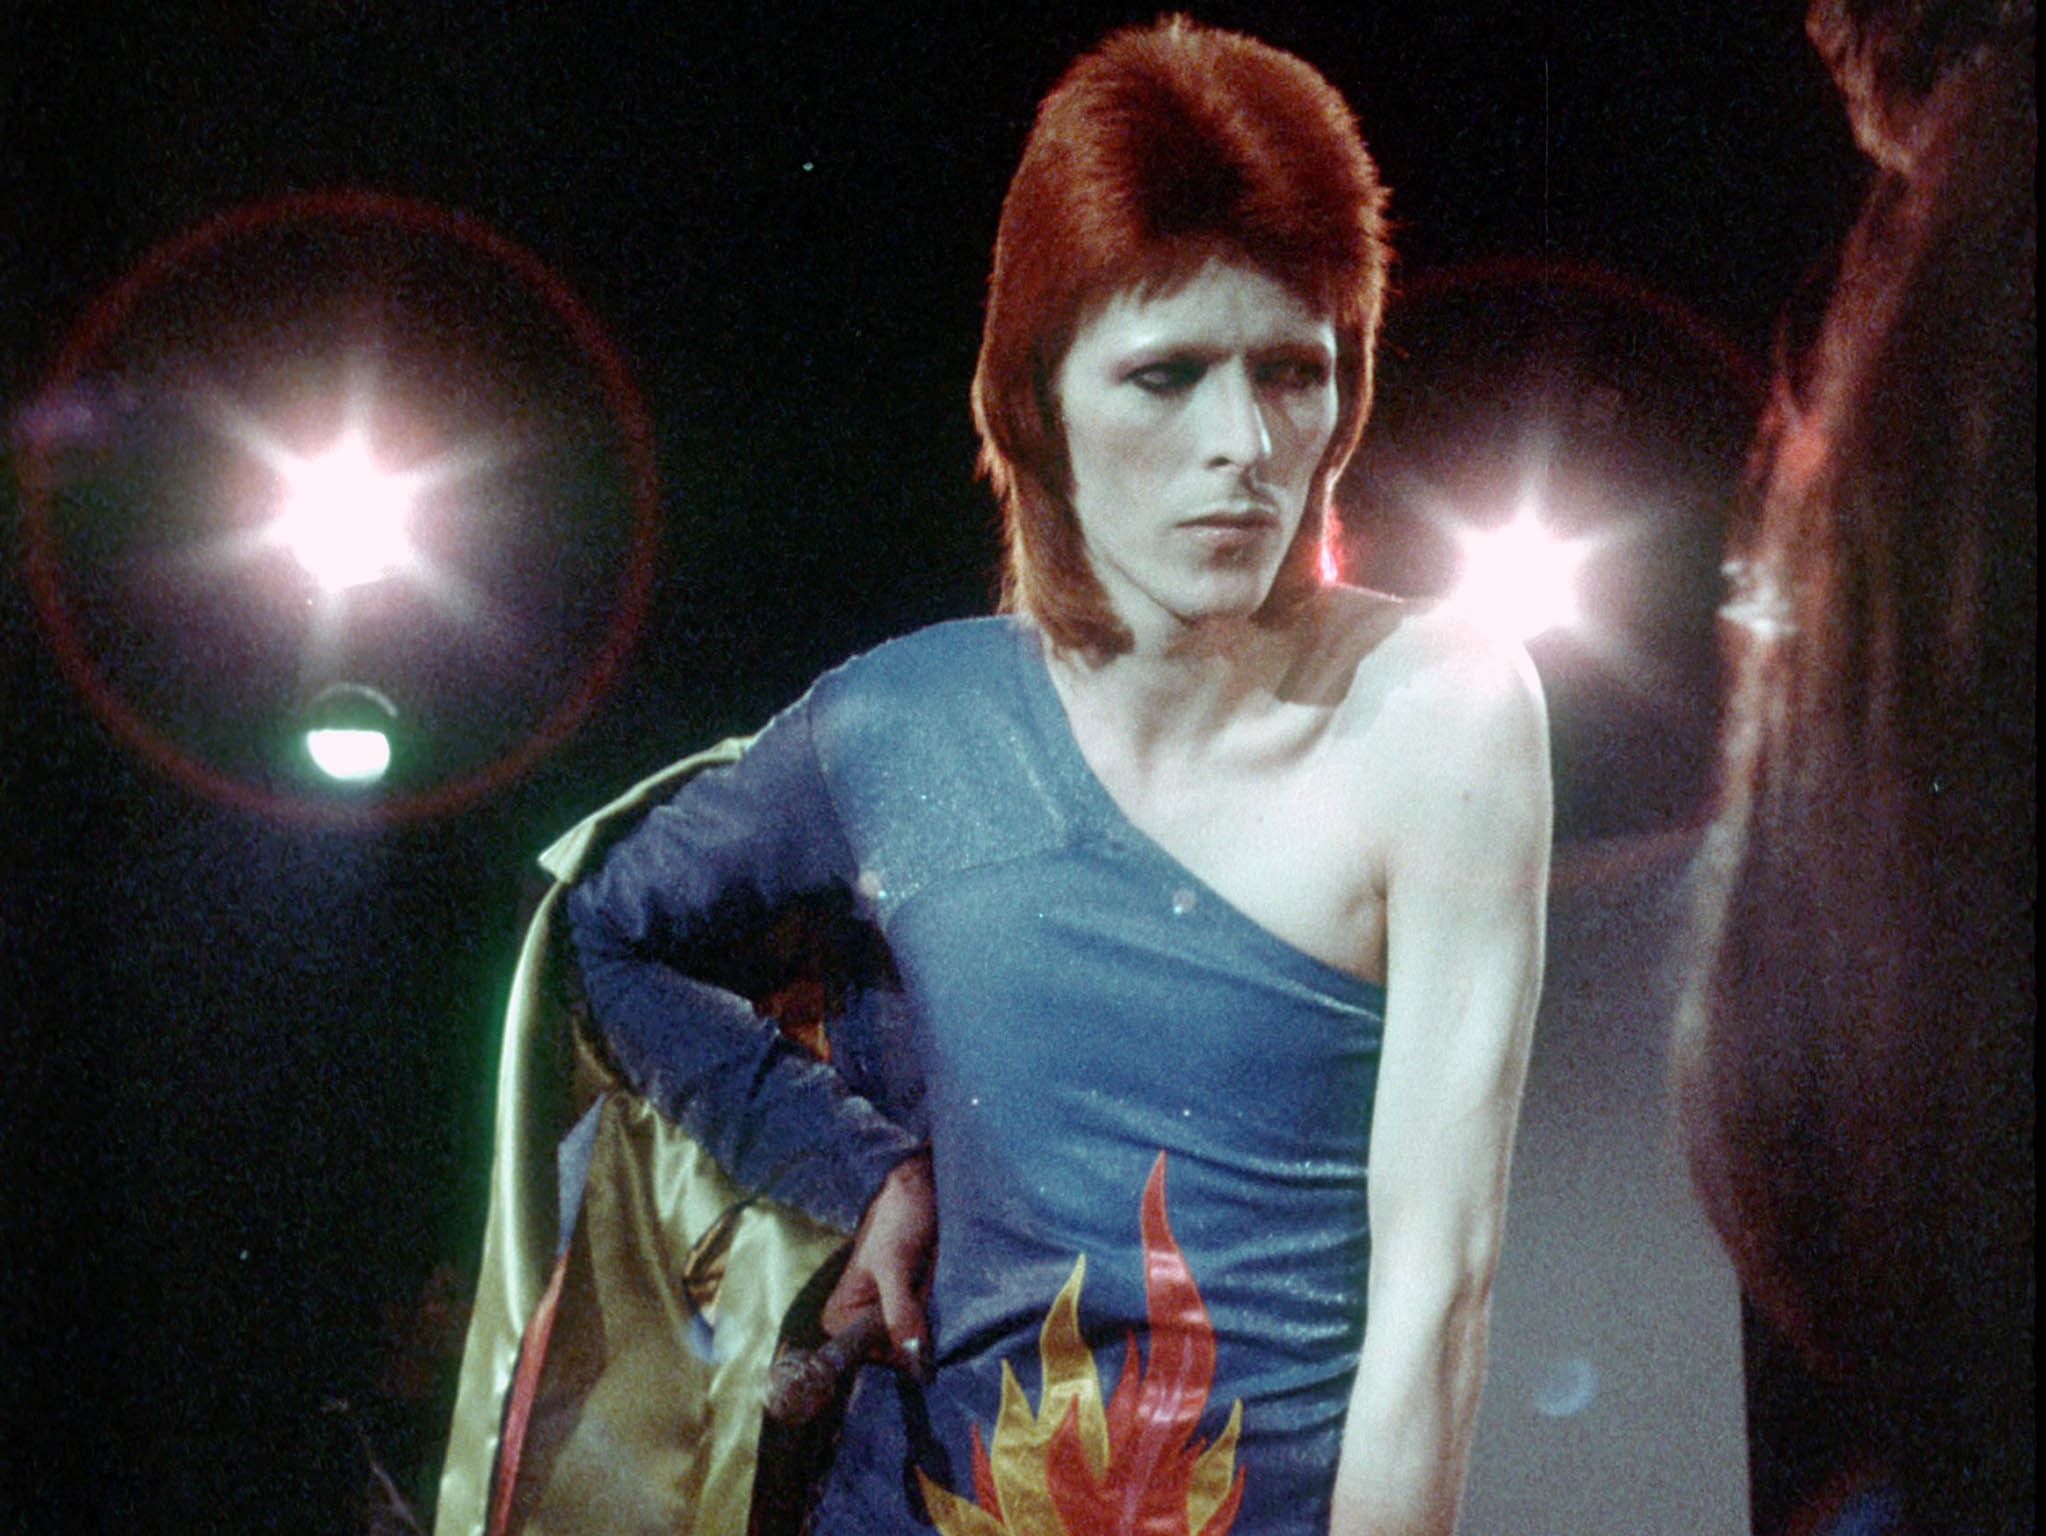 David Bowie performs onstage during his "Ziggy Stardust" era in 1973 in Los Angeles, California